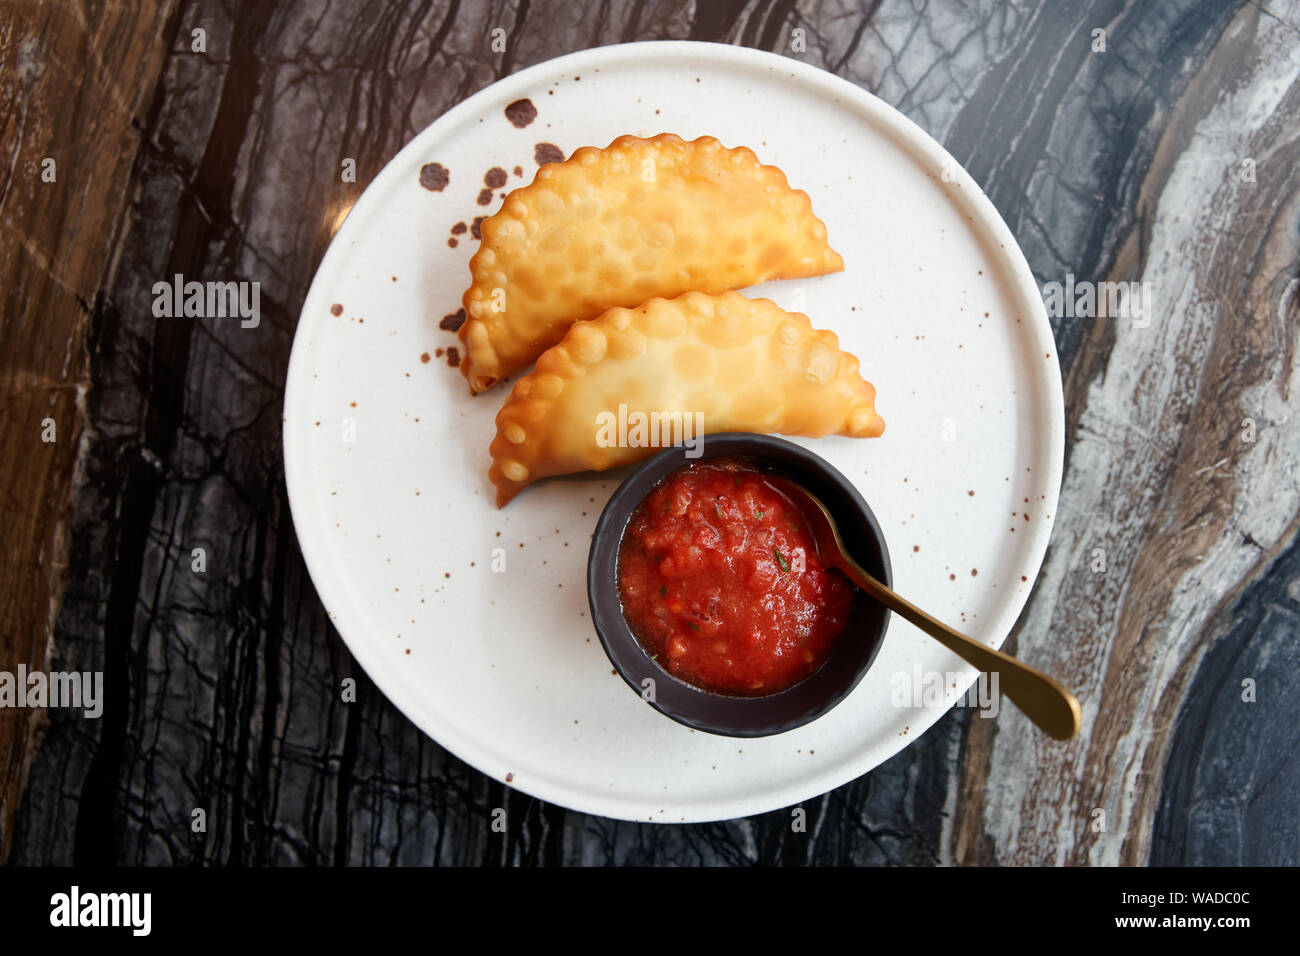 Deep fried meat pastry with hot tomato sauce shot from above Stock Photo